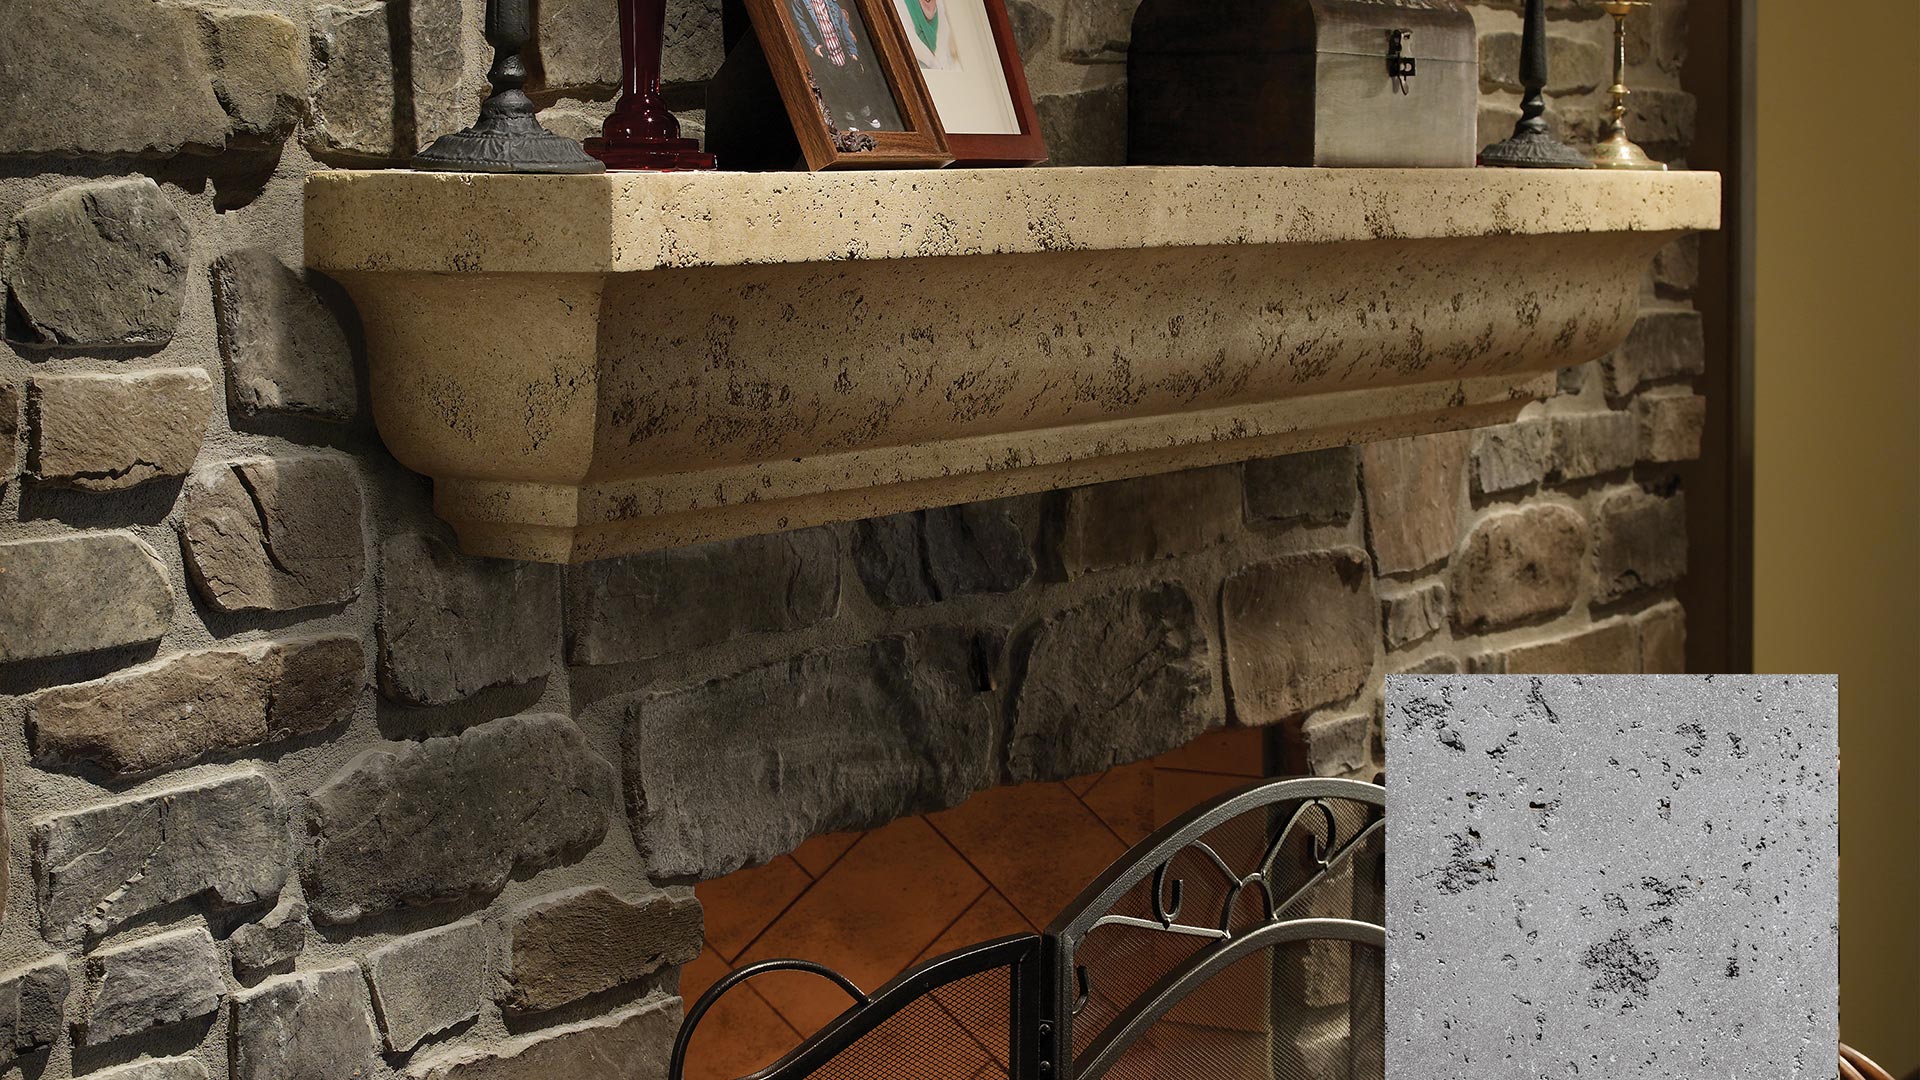 The Angelo Aged Teak Travertine Mantel by Kindred